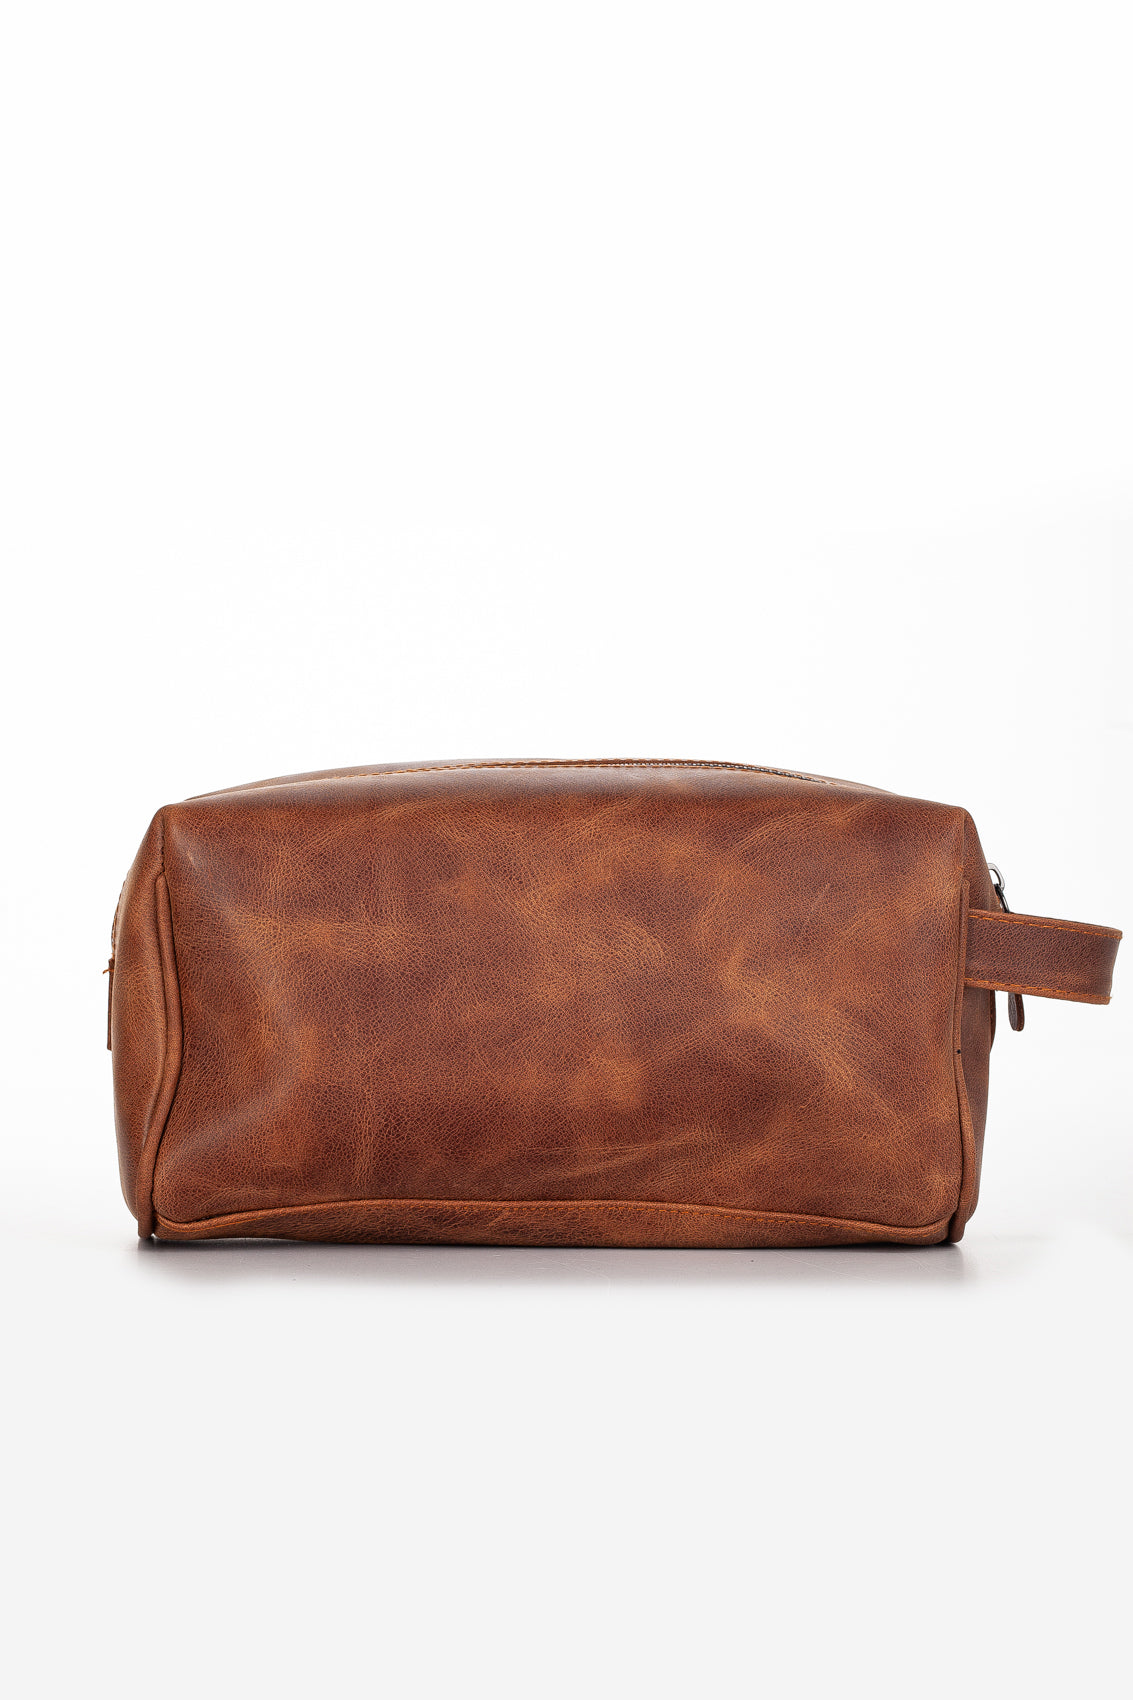 Single Section Toiletry Bag